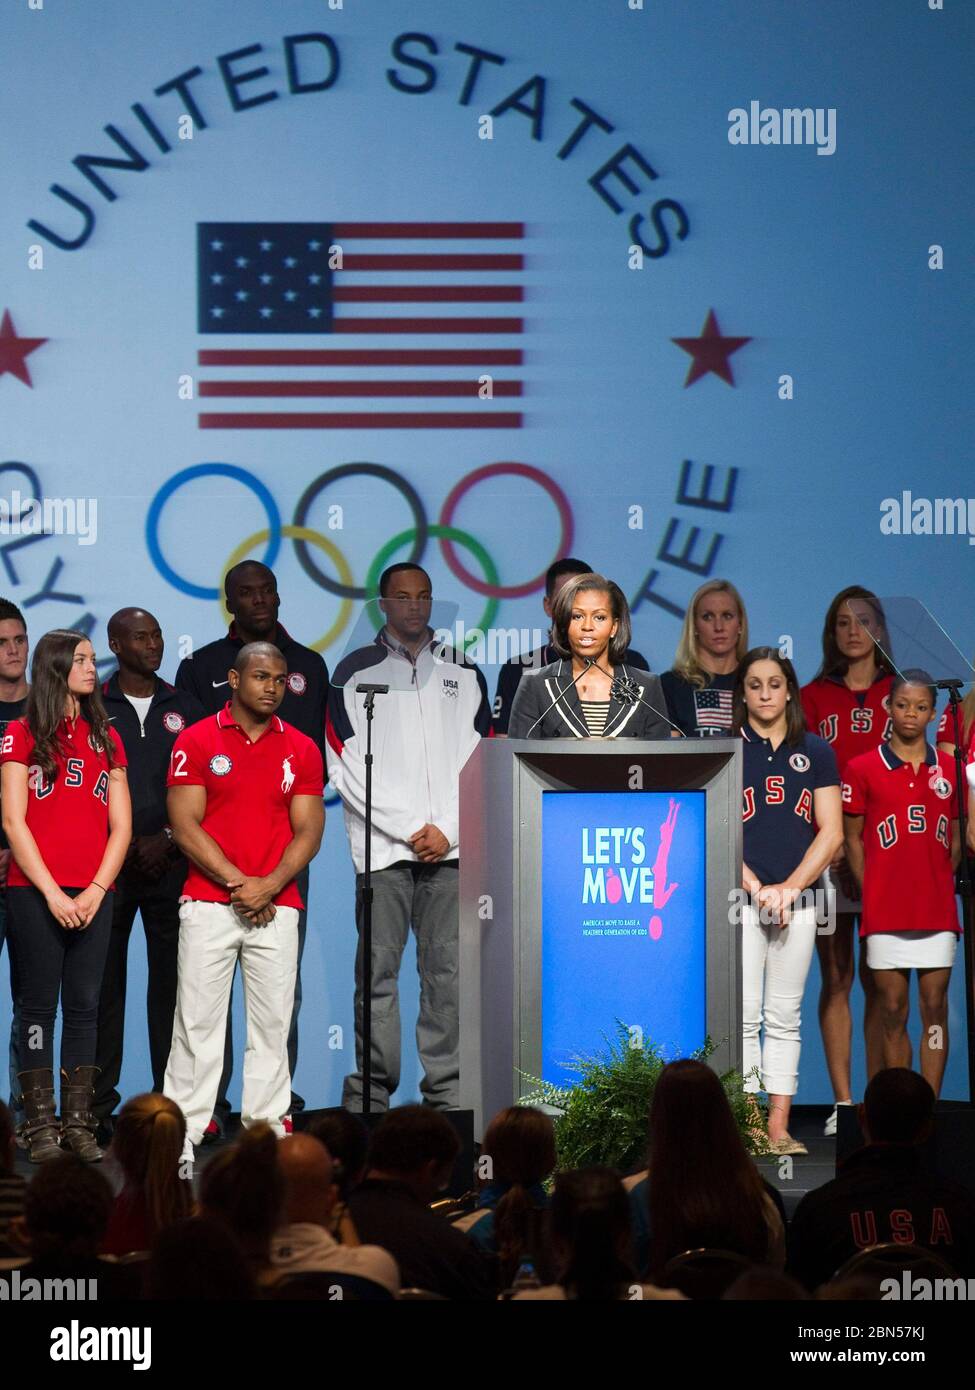 Dallas Texas USA, May 2012: First Lady of the United States Michelle Obama speaks at the United States Olympic Media Summit along with several athletes on stage. Marjorie Kamys Cotera/Daemmrich Photography Stock Photo